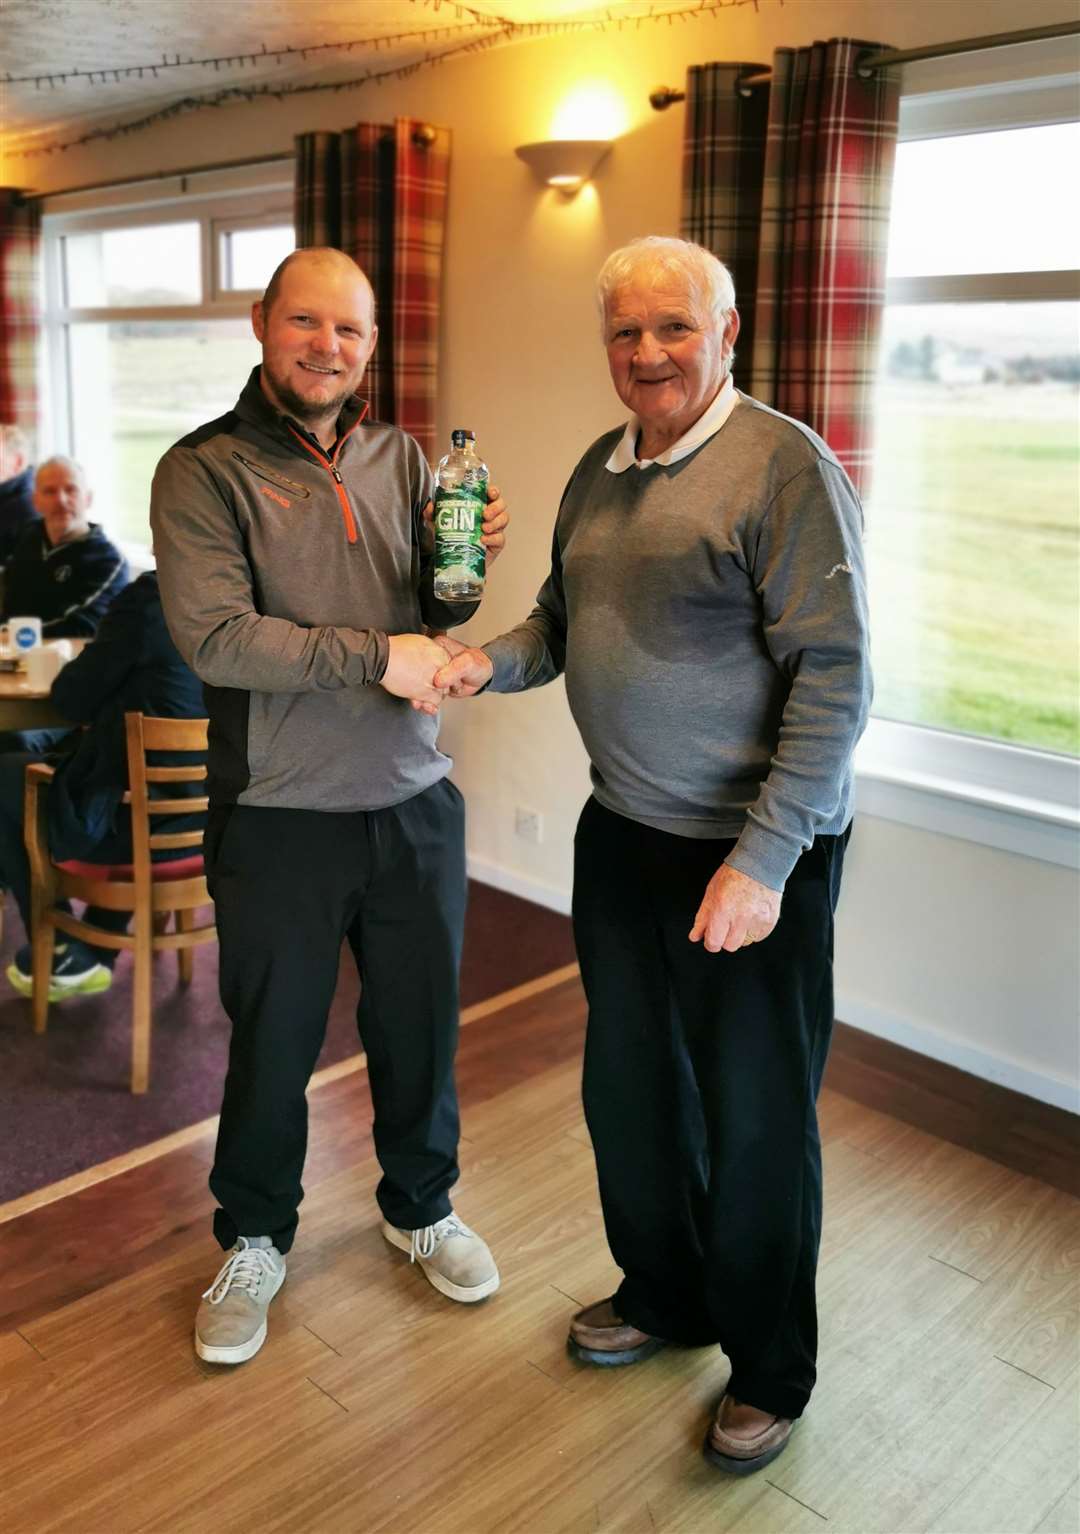 Reay greenkeeper Jason Norwood (left), winner of a bottle of gin courtesy of North Point Distillery at the recent Senior Stableford competition, receiving his prize from Kenny Farmer Snr. Norwood was competing as a ‘guest senior’.